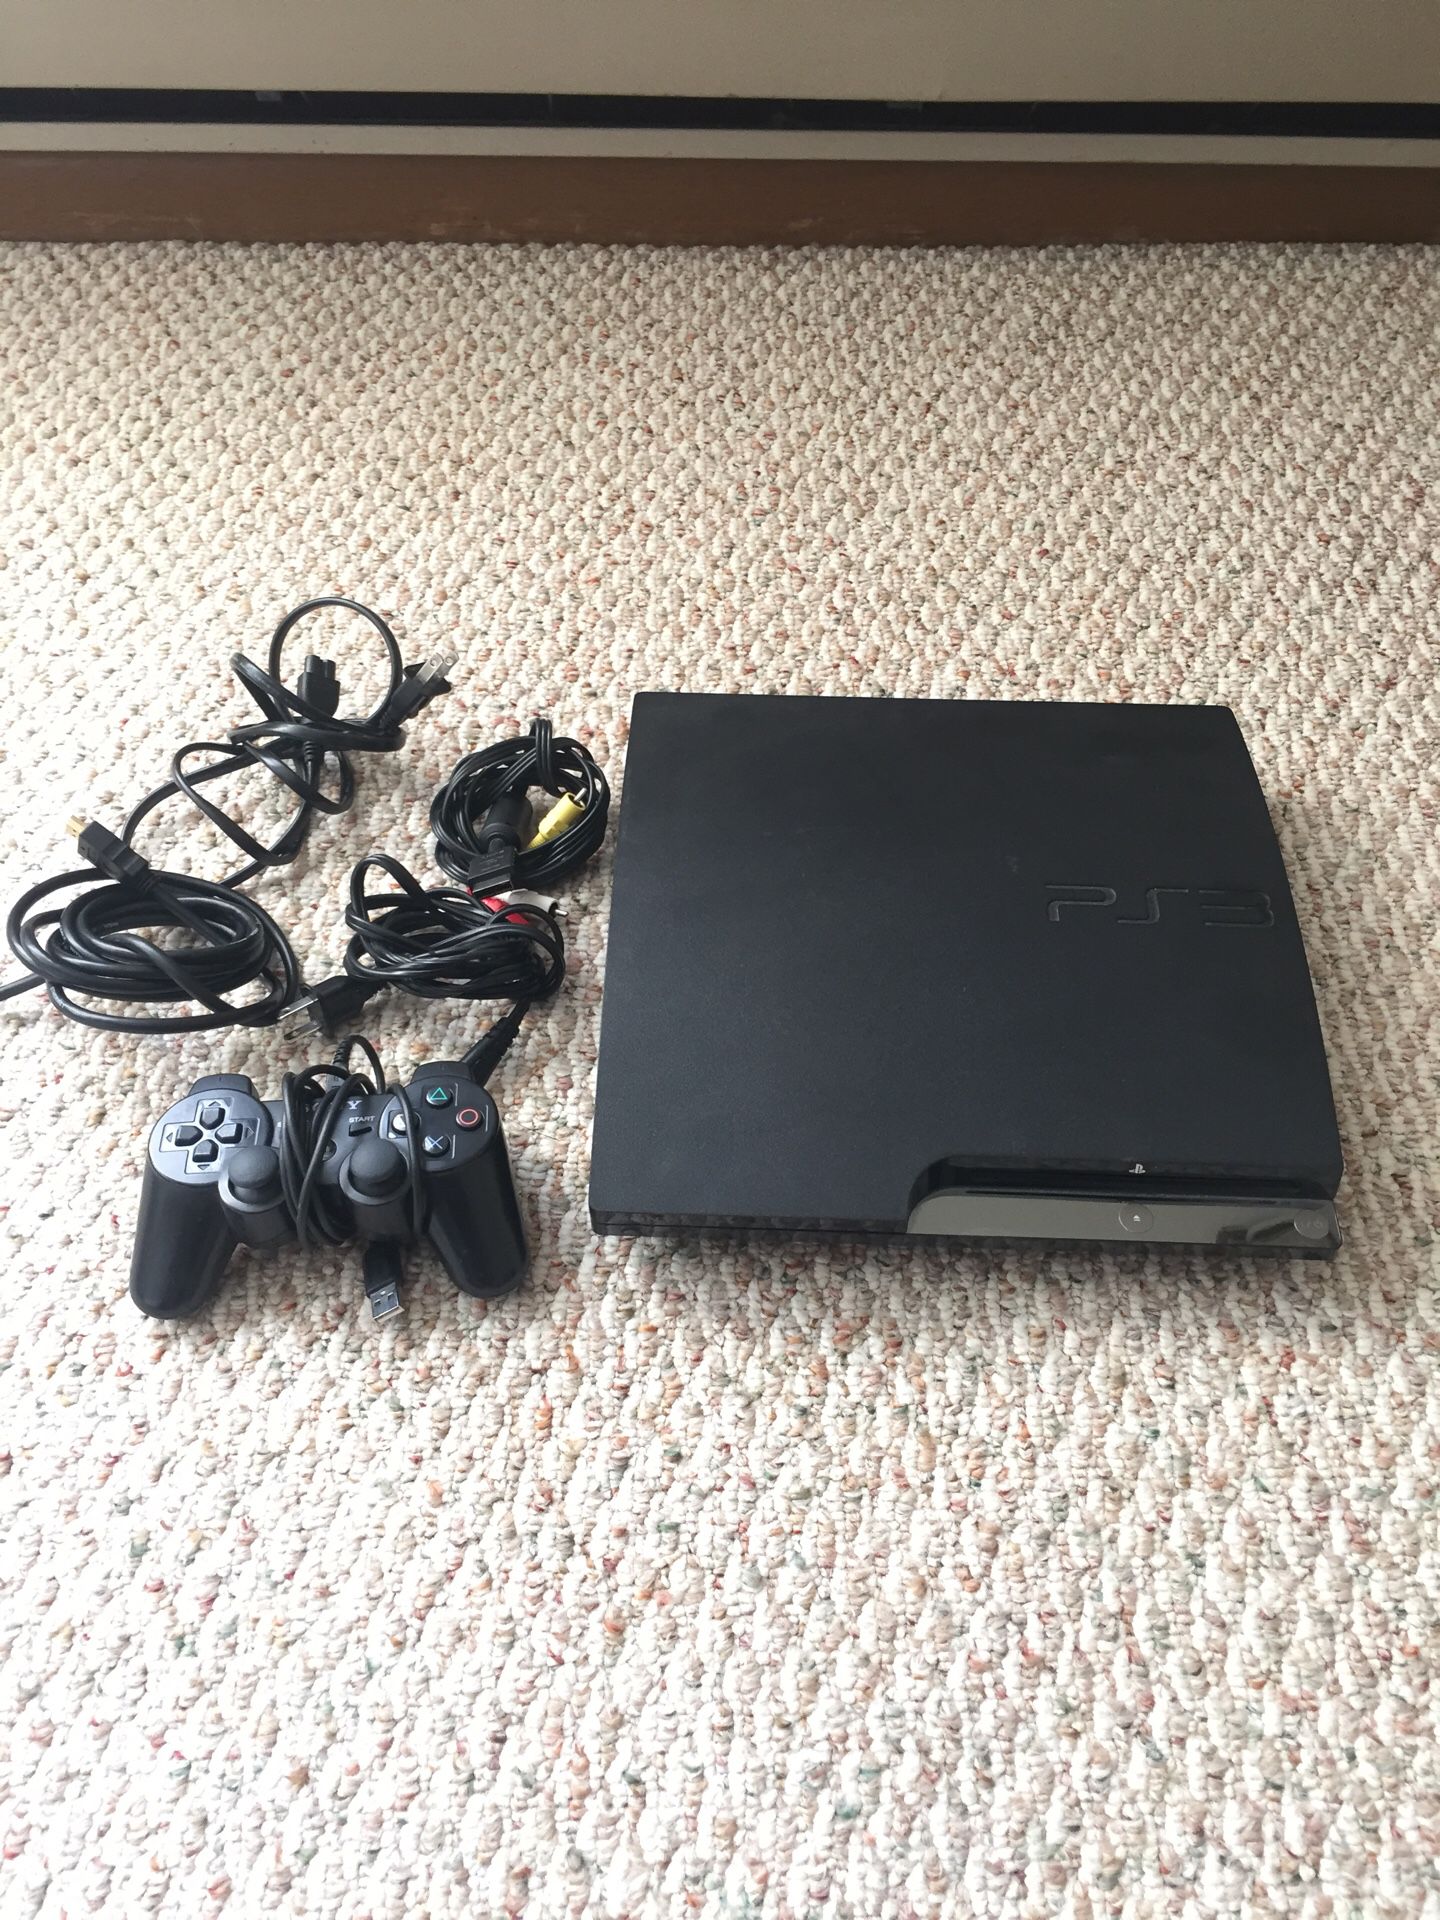 PlayStation 3. 4 games, 1 controller